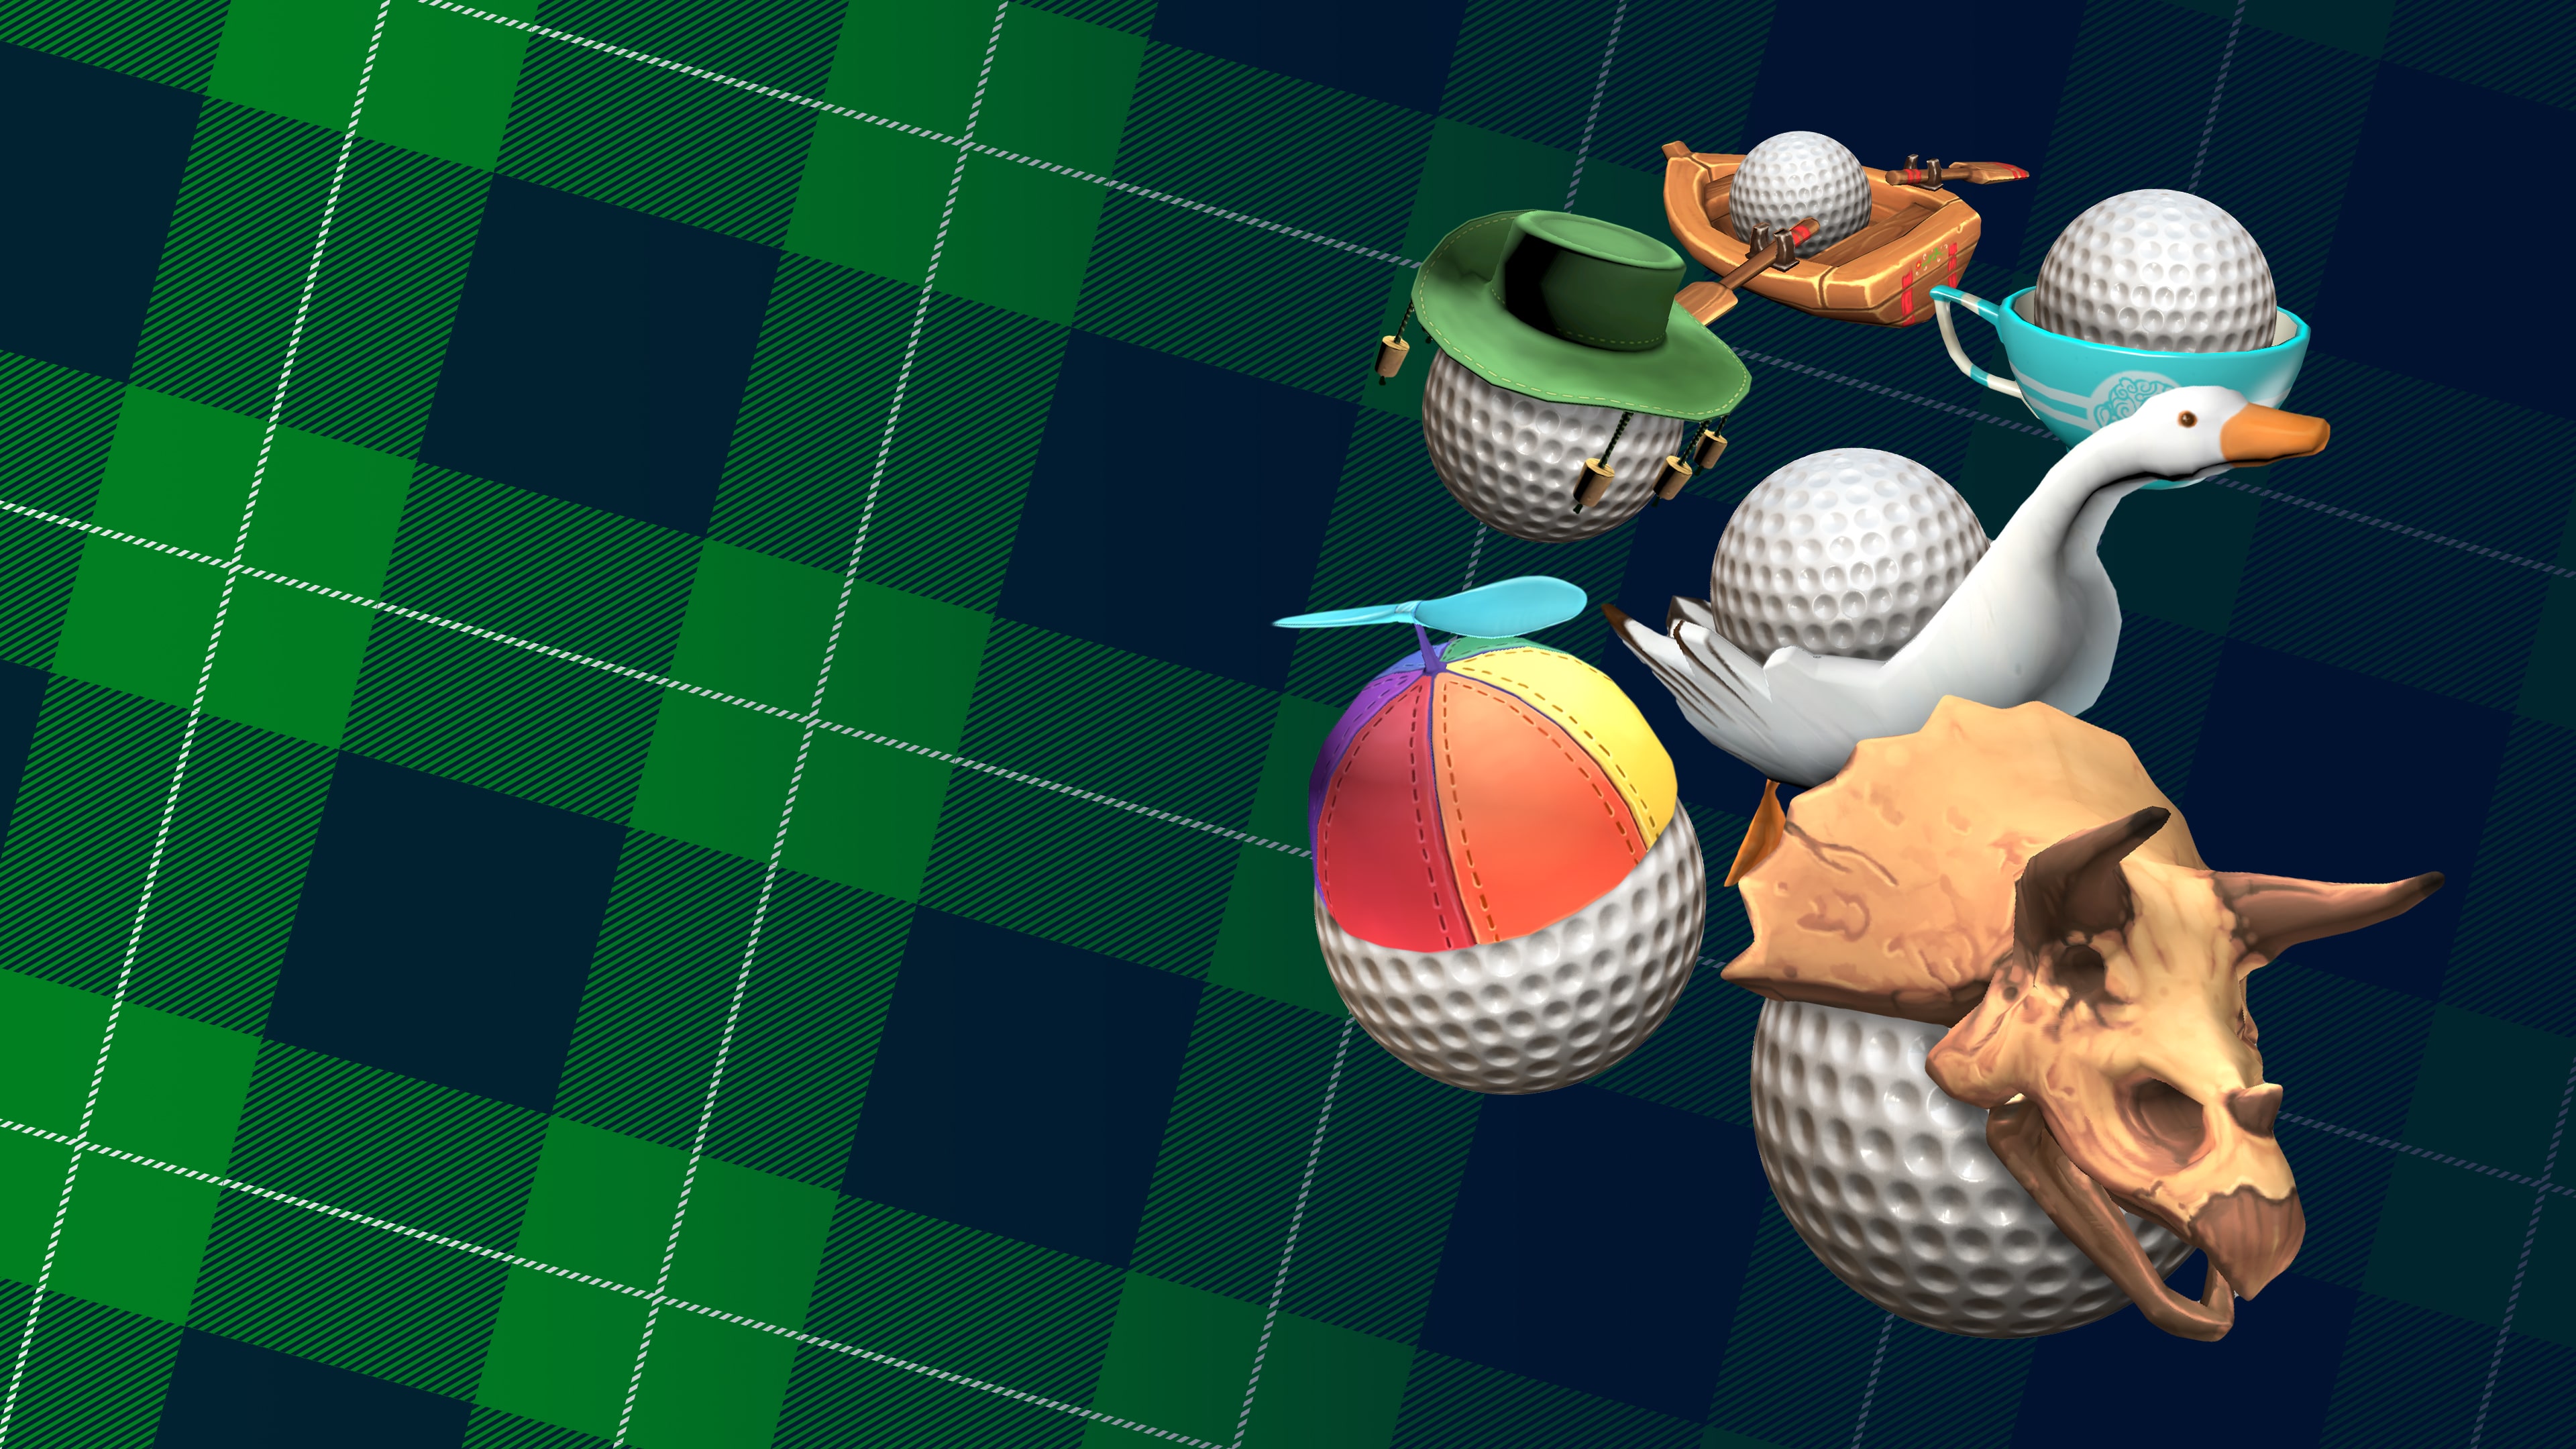 Golf With Your Friends - Caddy Pack